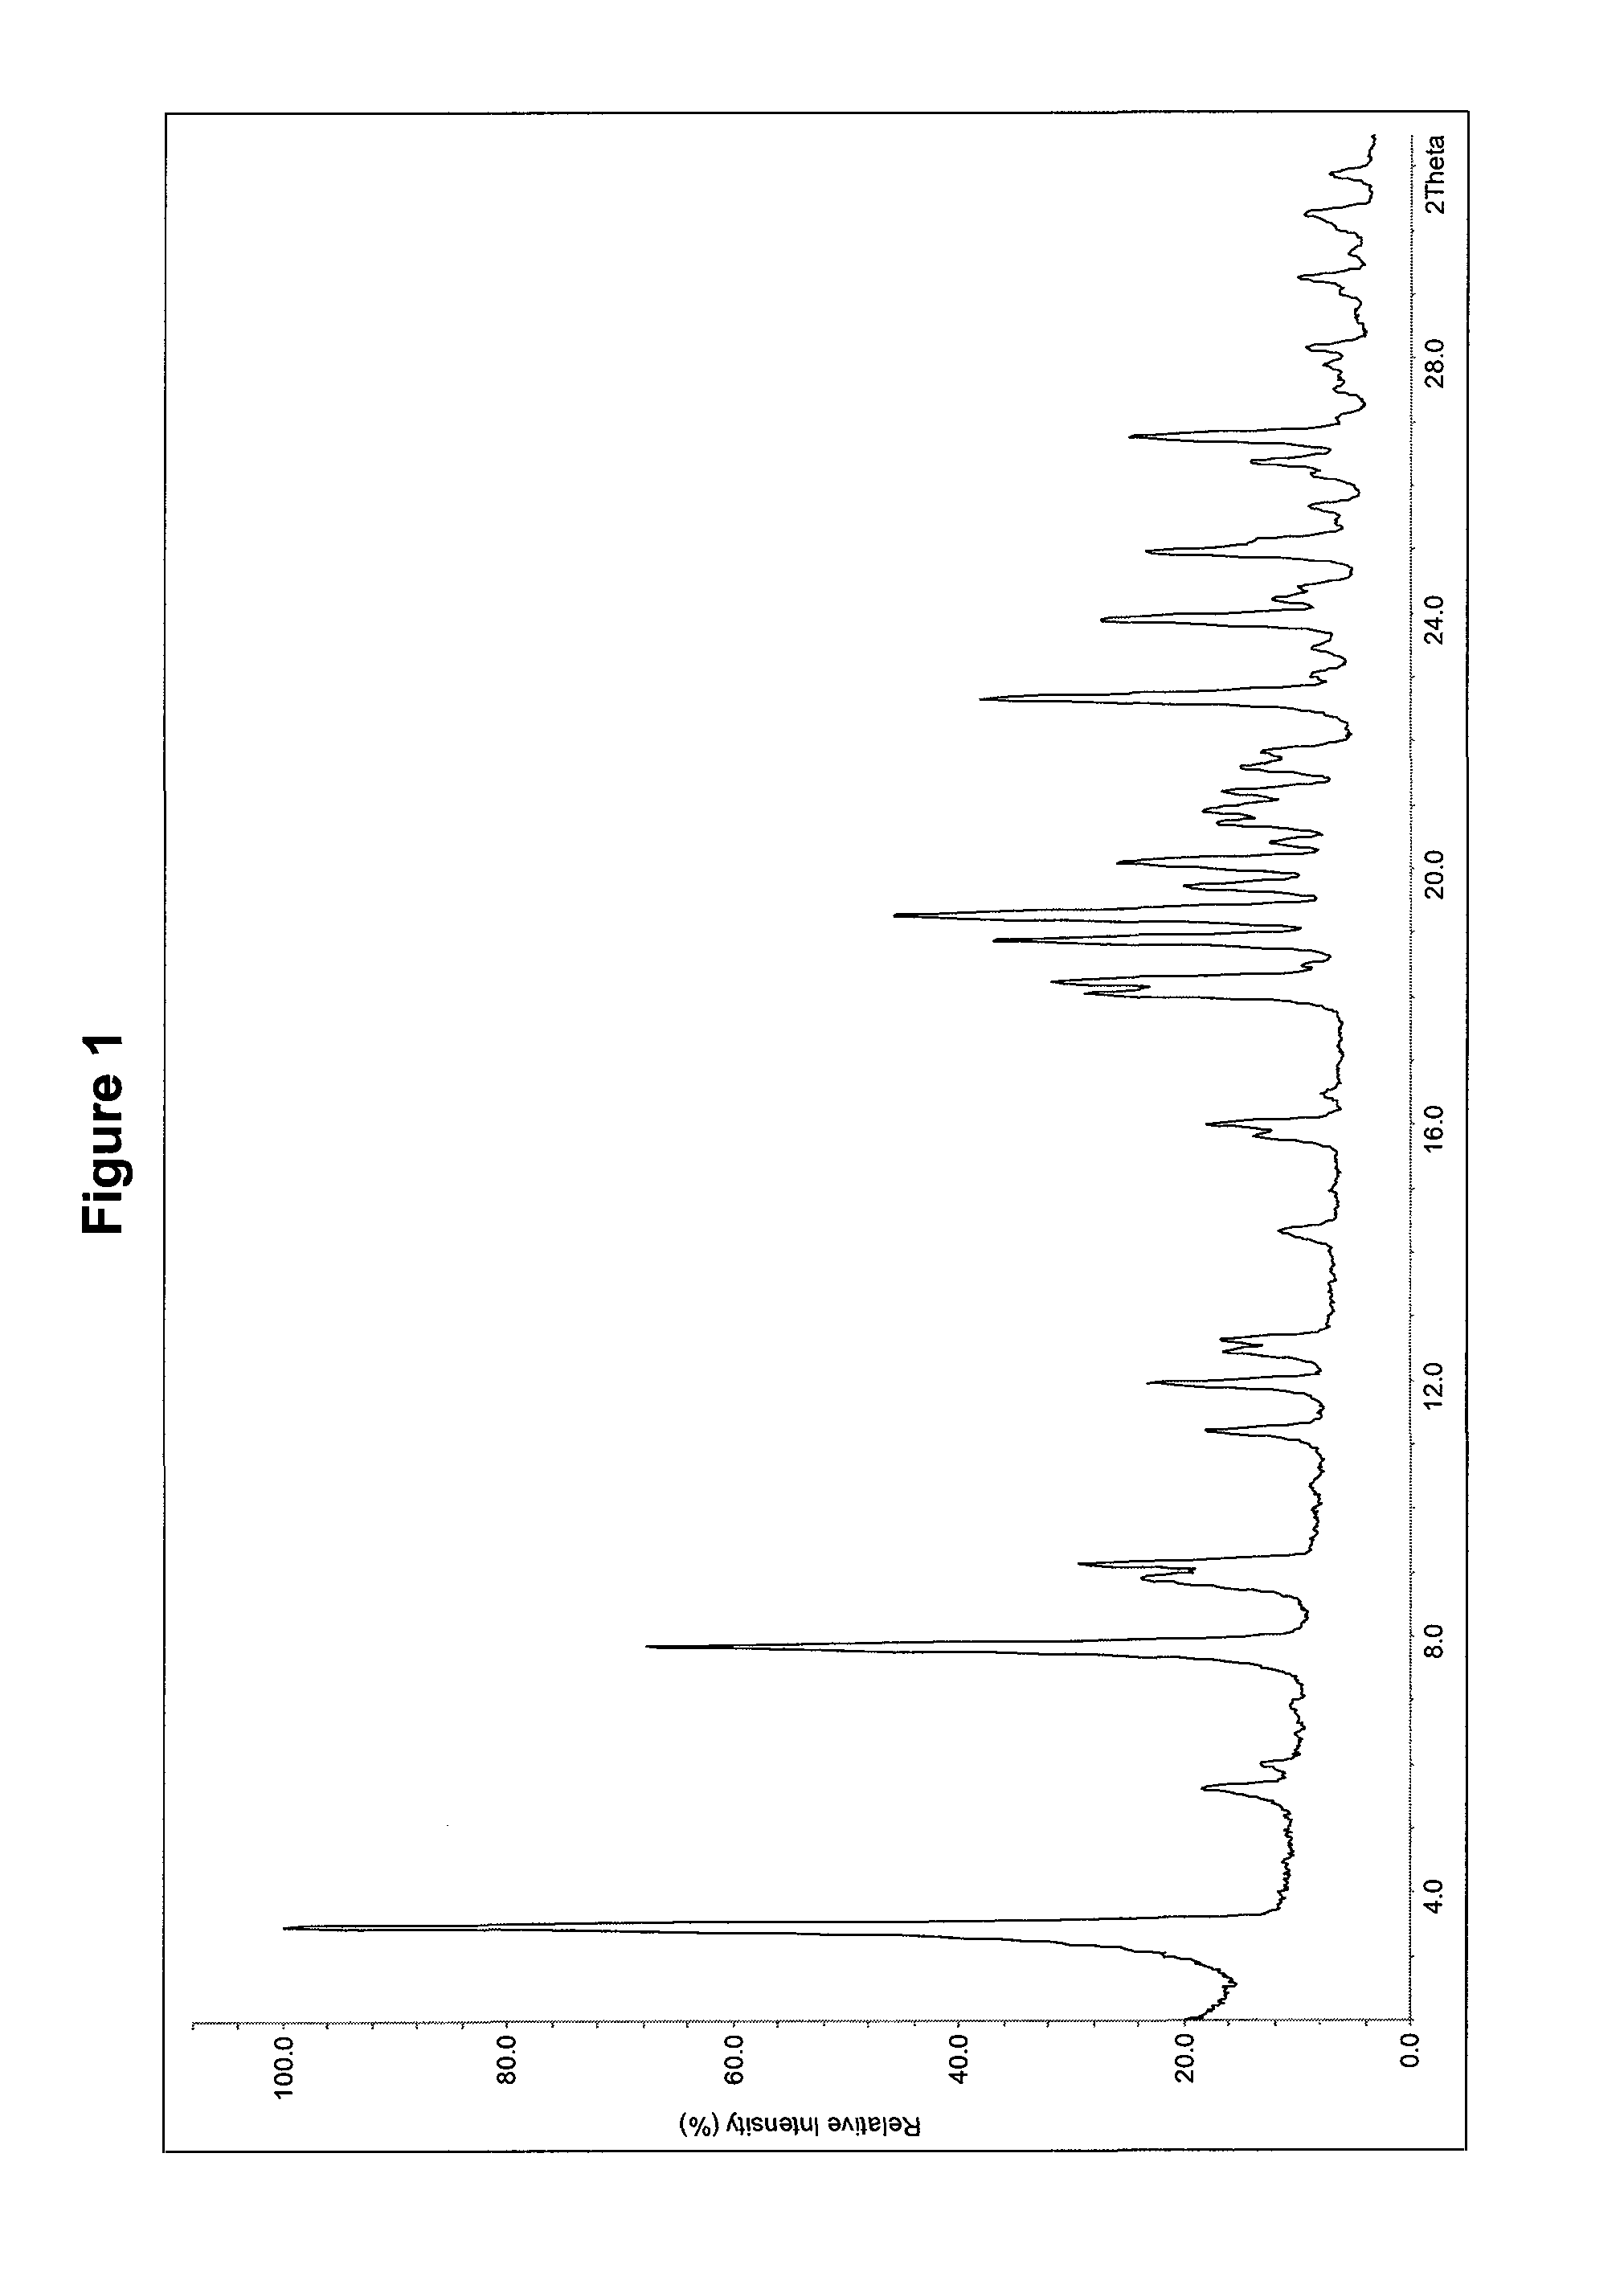 Dosage form with improved release of cefuroximaxetil